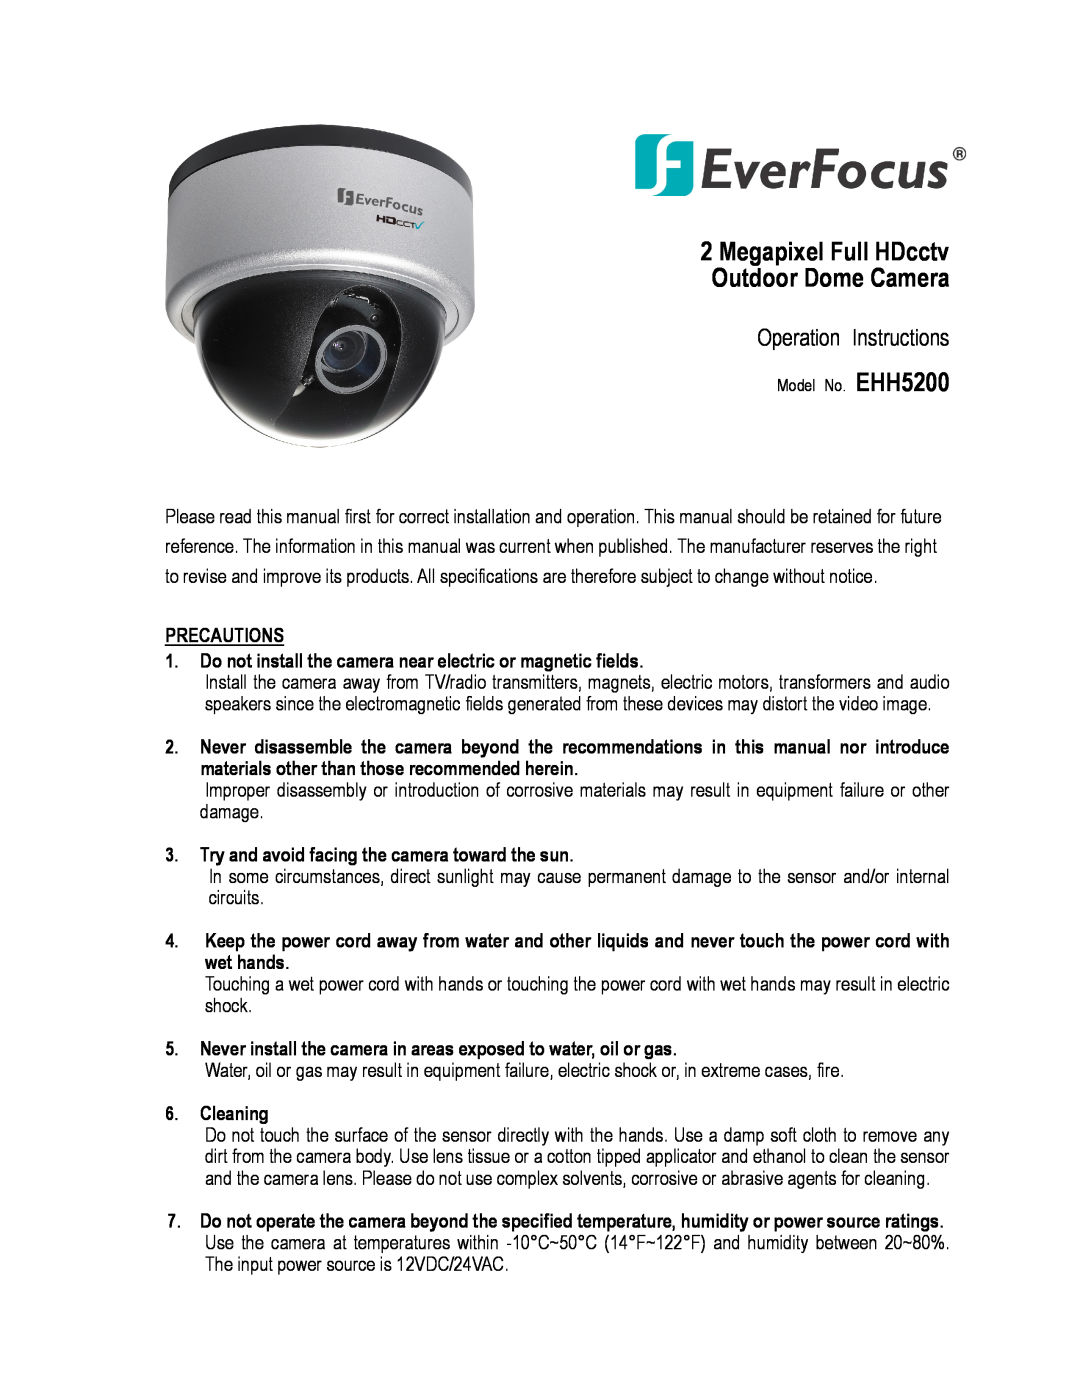 EverFocus EHH5200 specifications Megapixel Full HDcctv Outdoor Dome Camera, Operation Instructions 